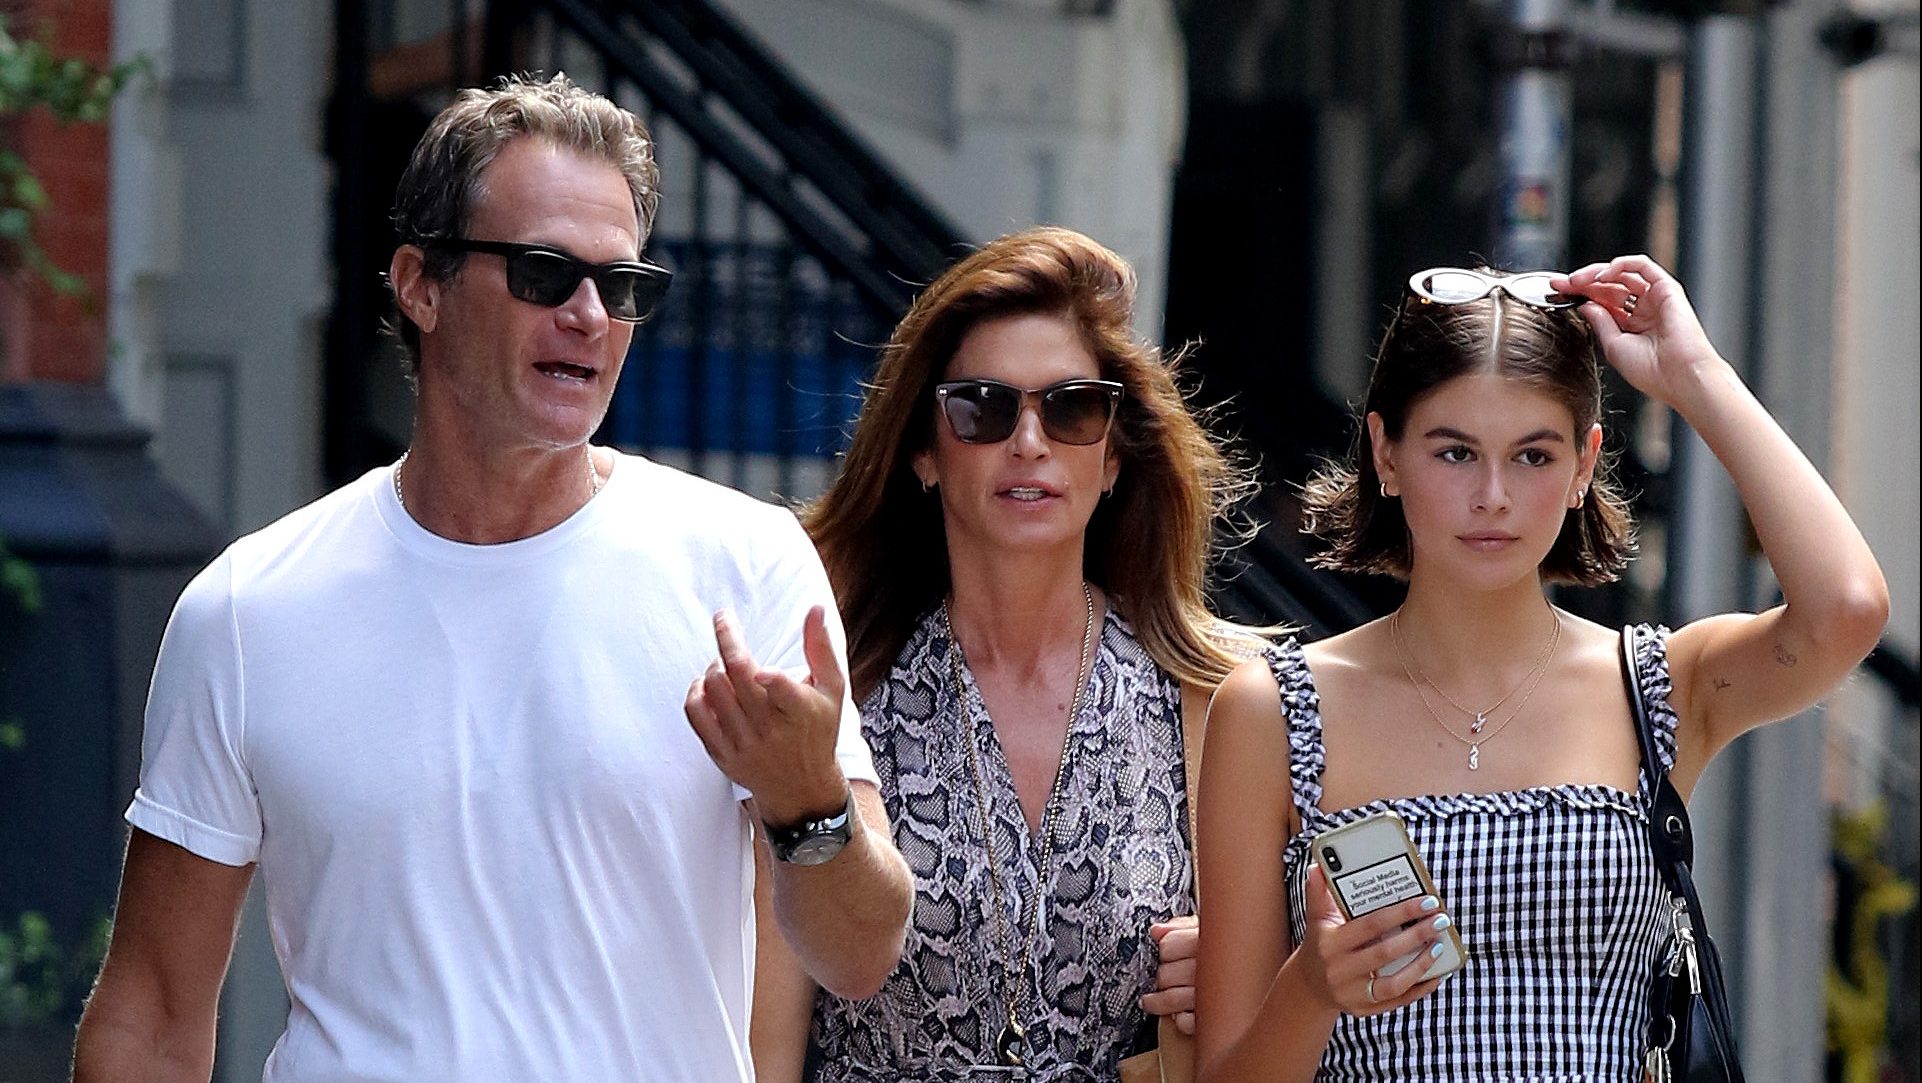 For Kaia Gerber, Less is More When it Comes to Shirt Buttons